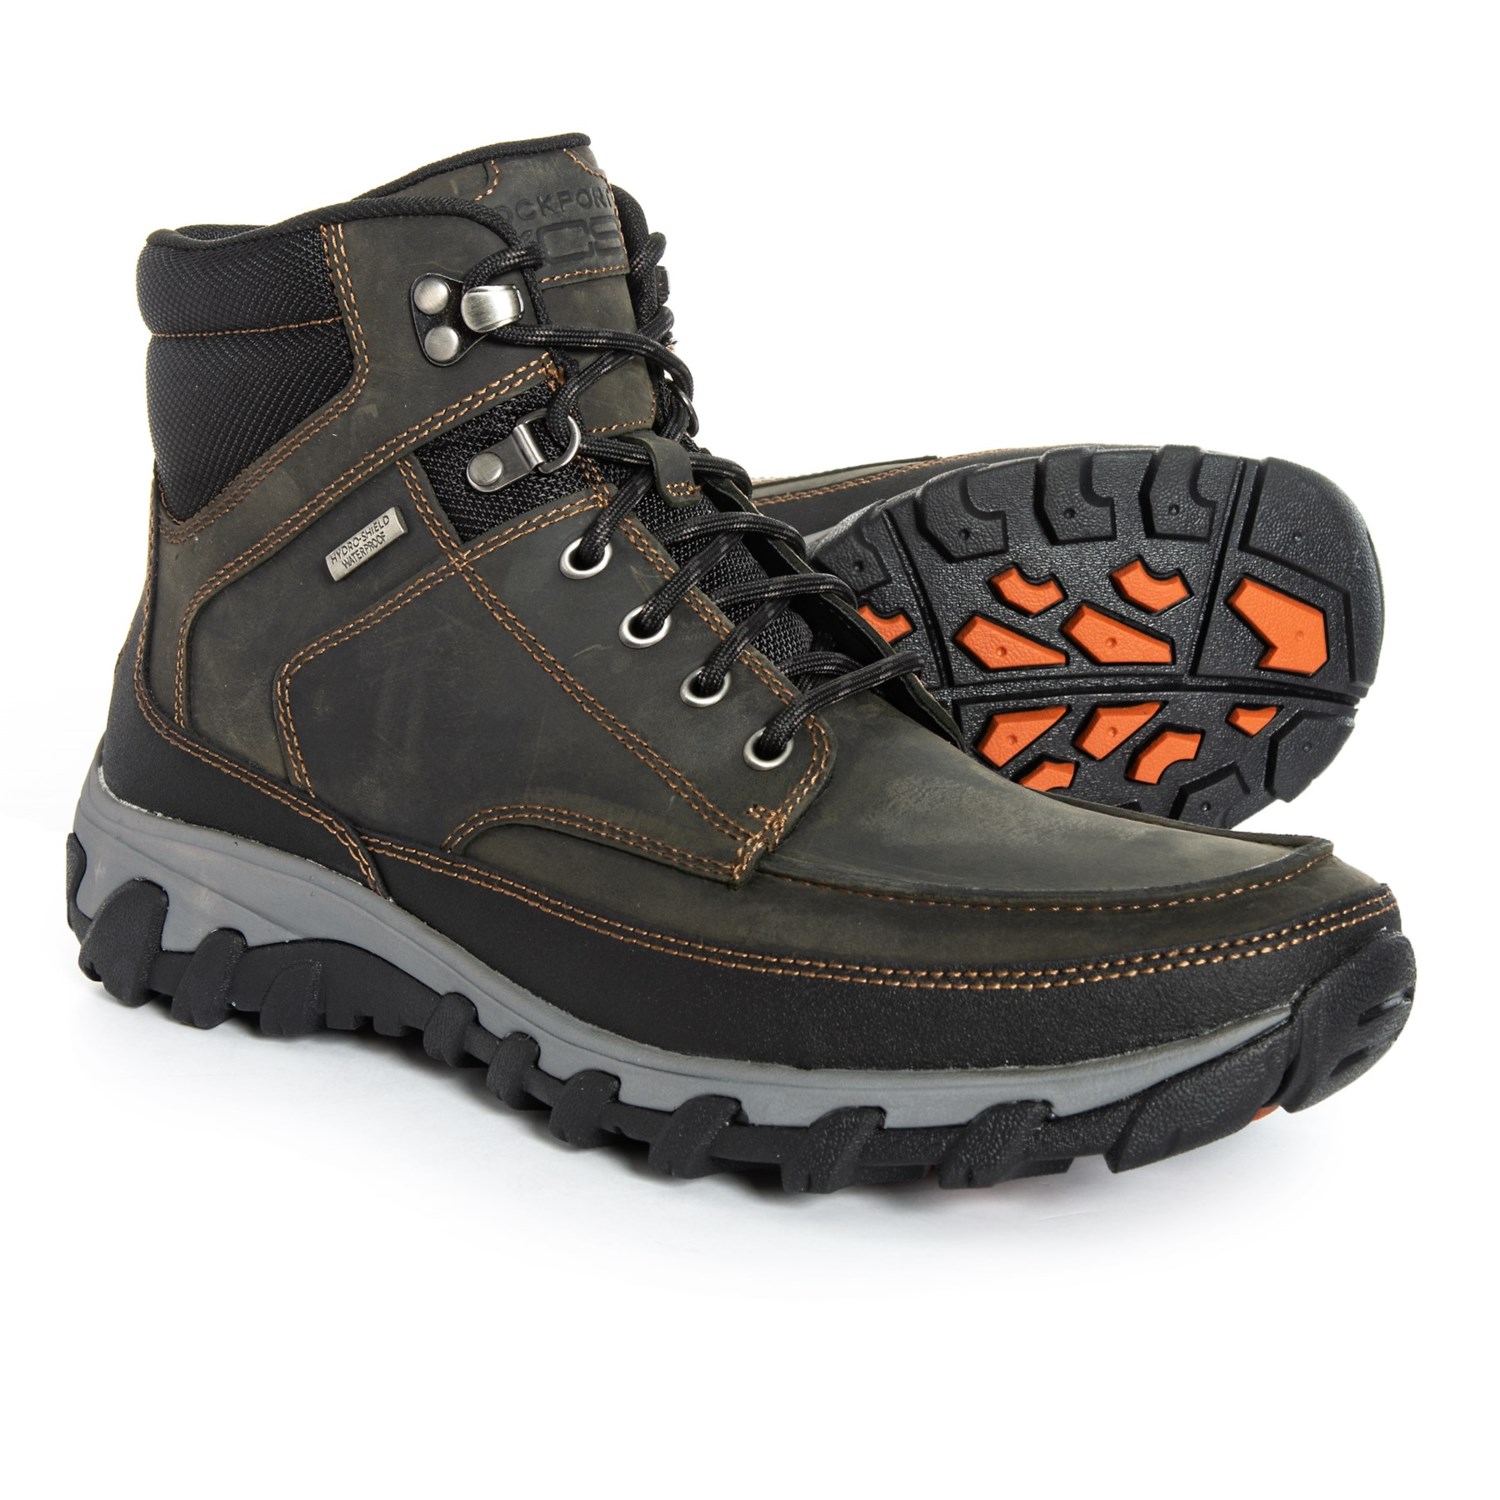 Rockport Cold Springs Plus Moc Toe Boots – Waterproof, Leather (For Men)